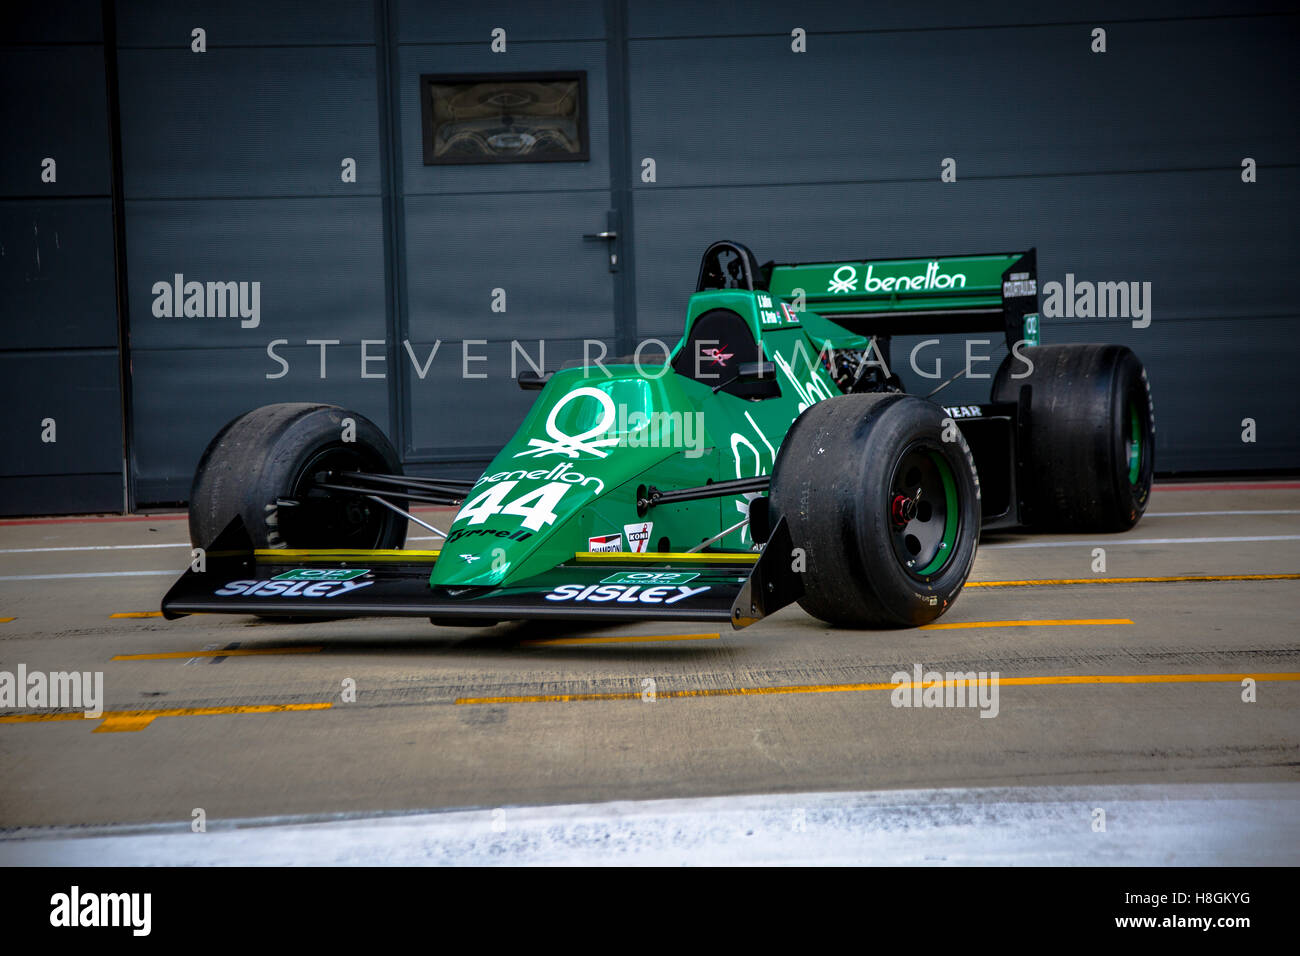 The Tyrrell 012 in Benetton colours that will be racing in the FIA Masters  Historic Formula One Stock Photo - Alamy